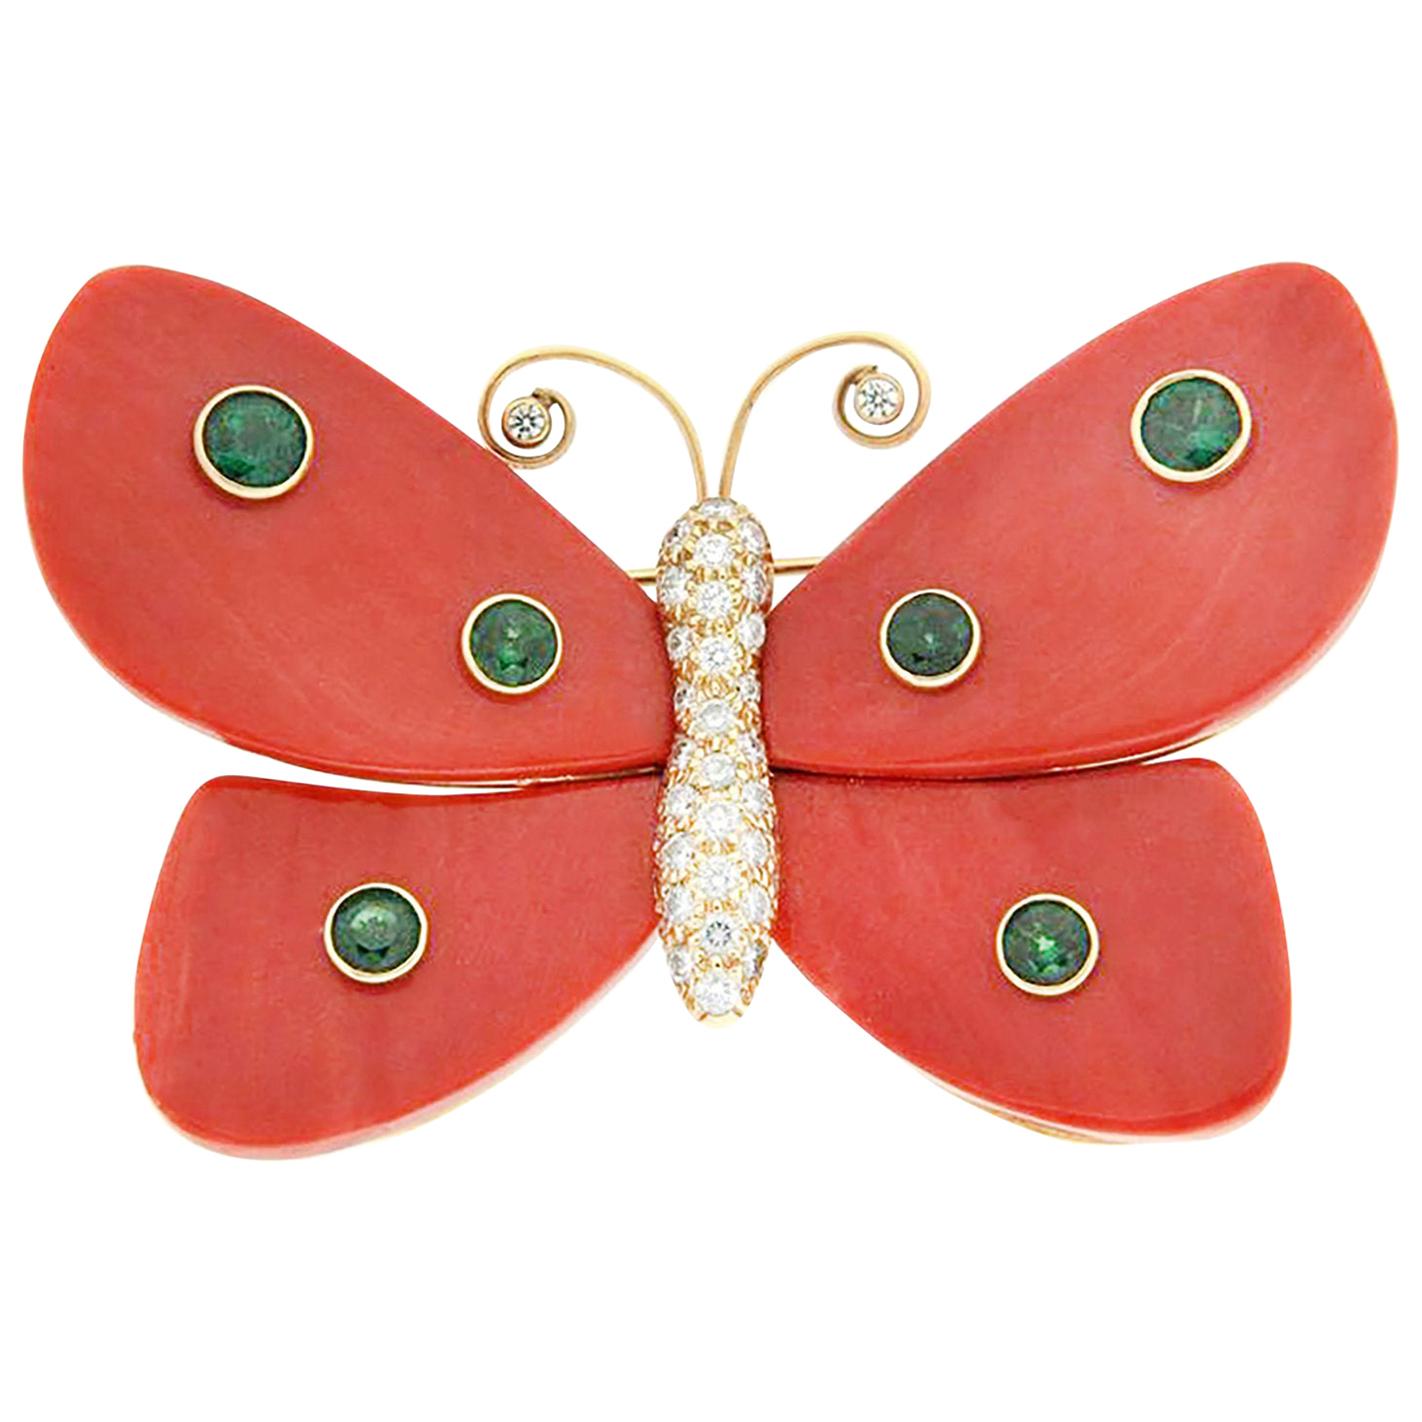 Mariposas Butterfly Coral Brooch